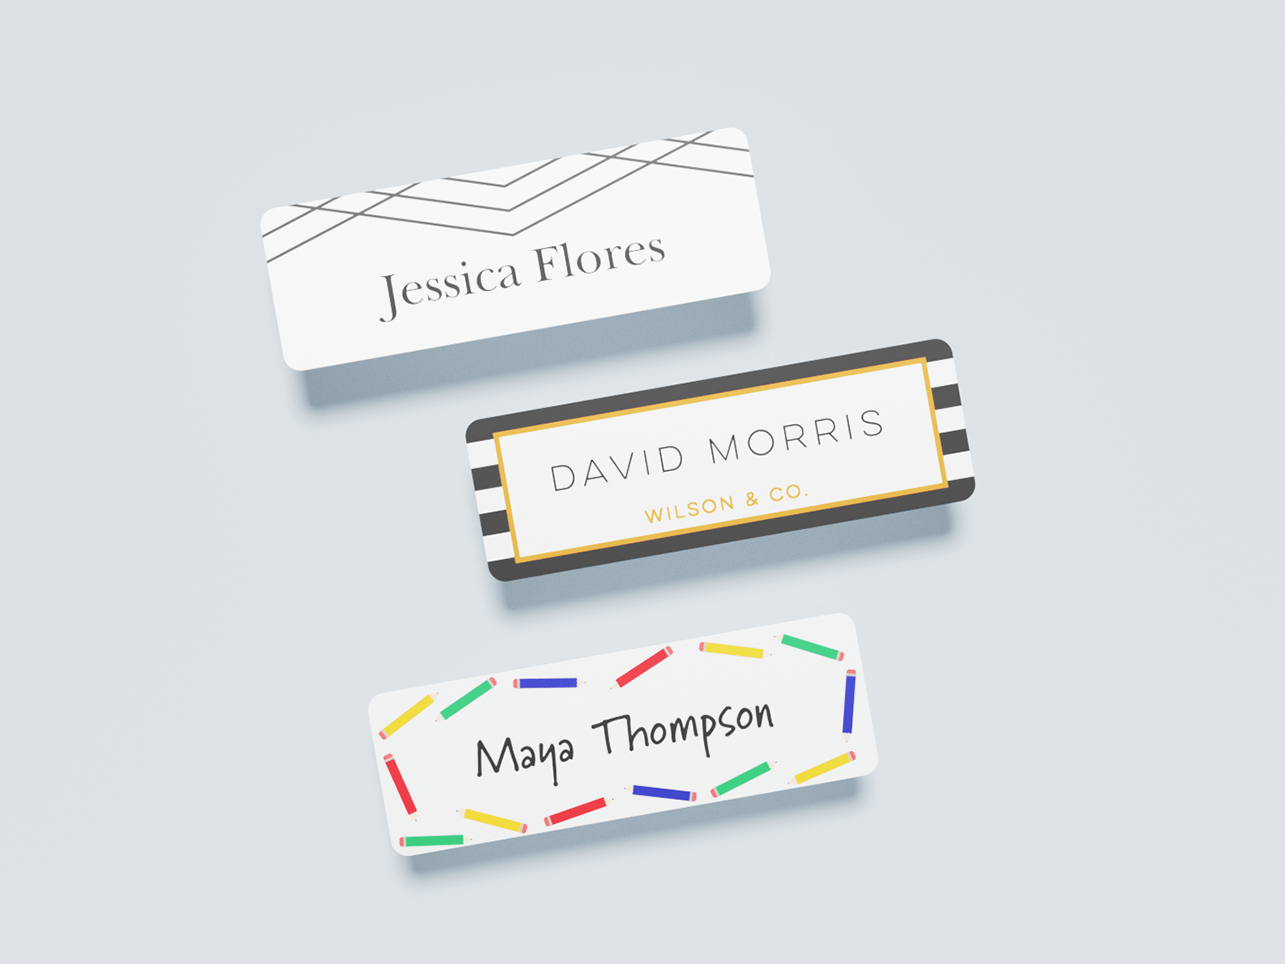 Custom Magnetic Name Badges - Bronze Engraved Magnetic Name Tags